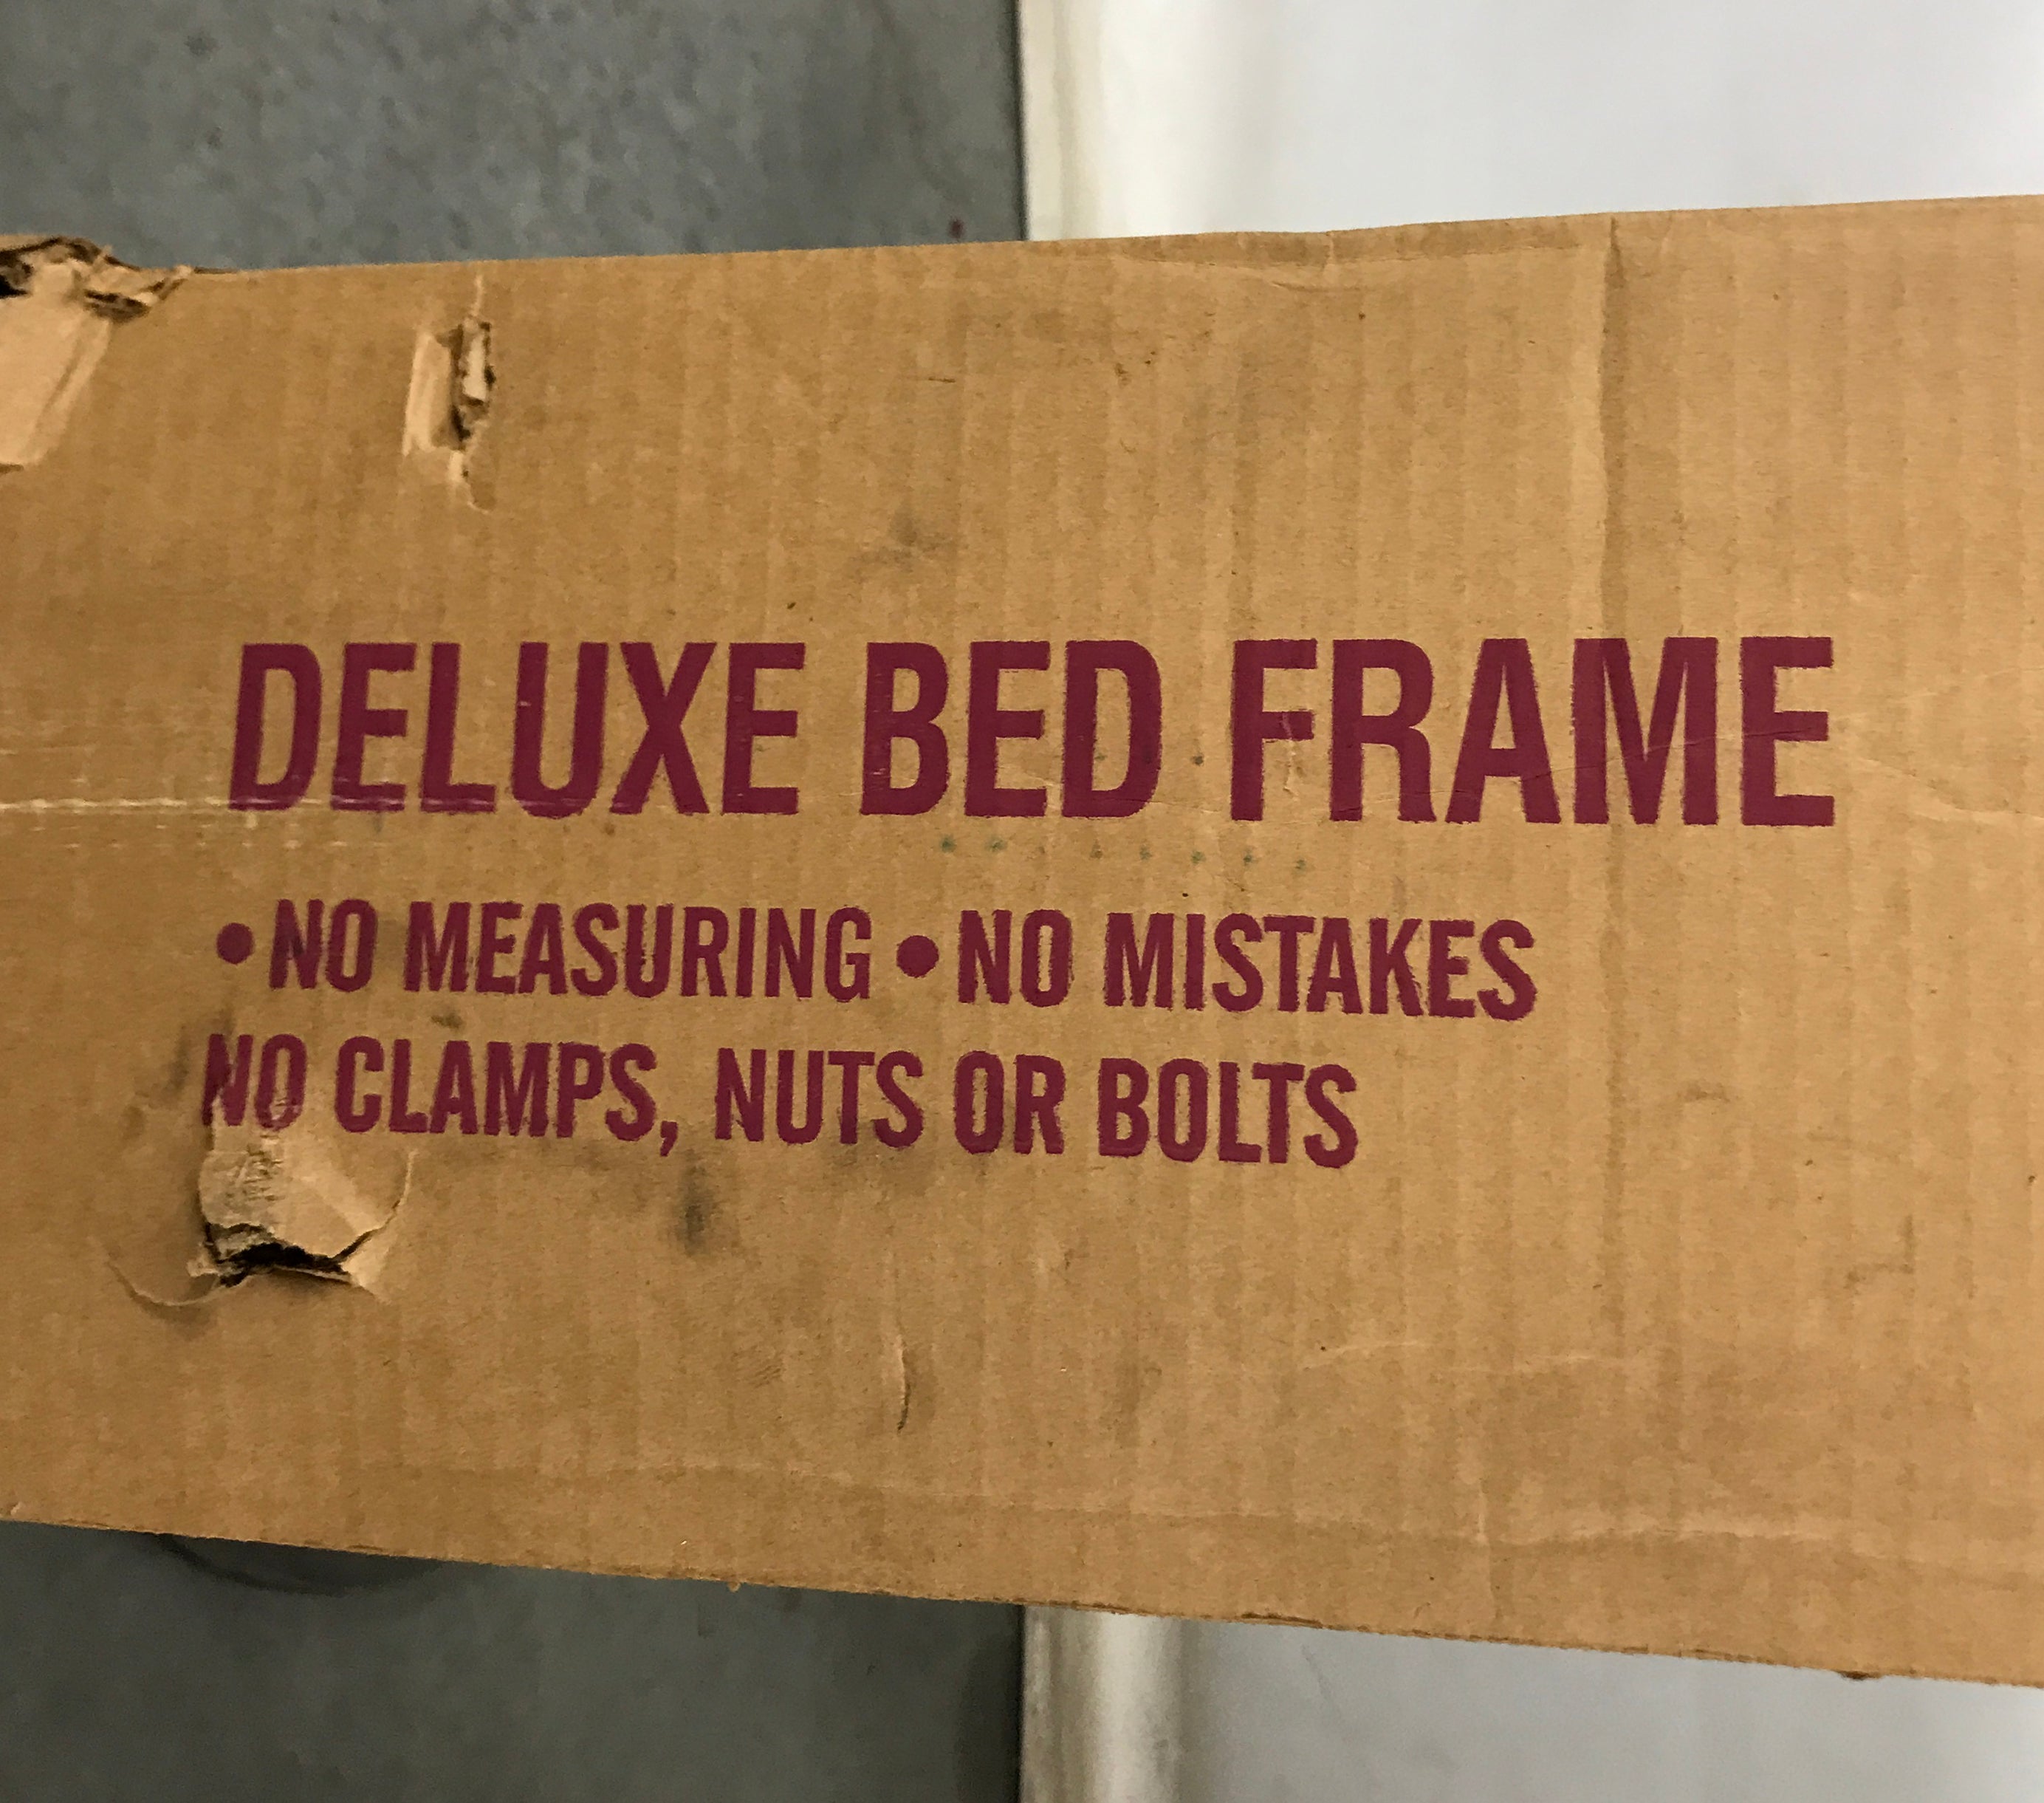 Glideaway Deluxe Bed Frame in Original Box